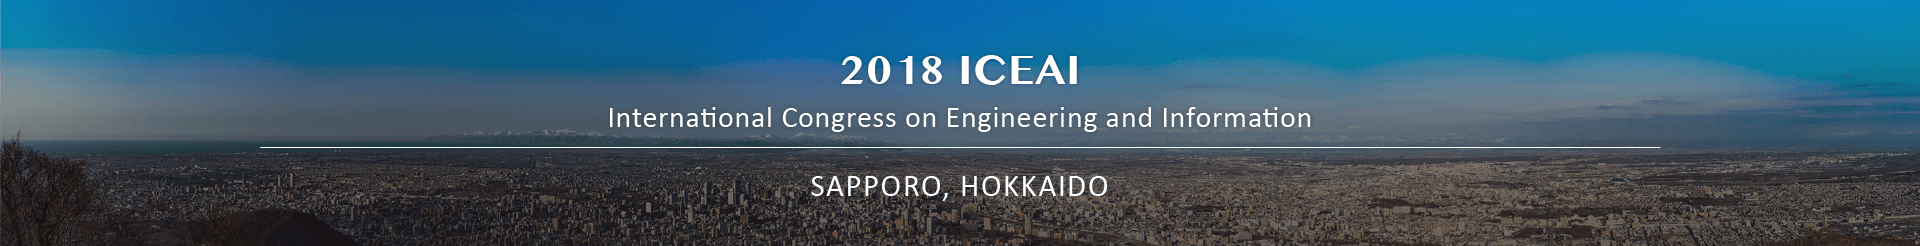 For more information, please visit: http://www.iceai.org
or contact: info.iceai@iceai.org 